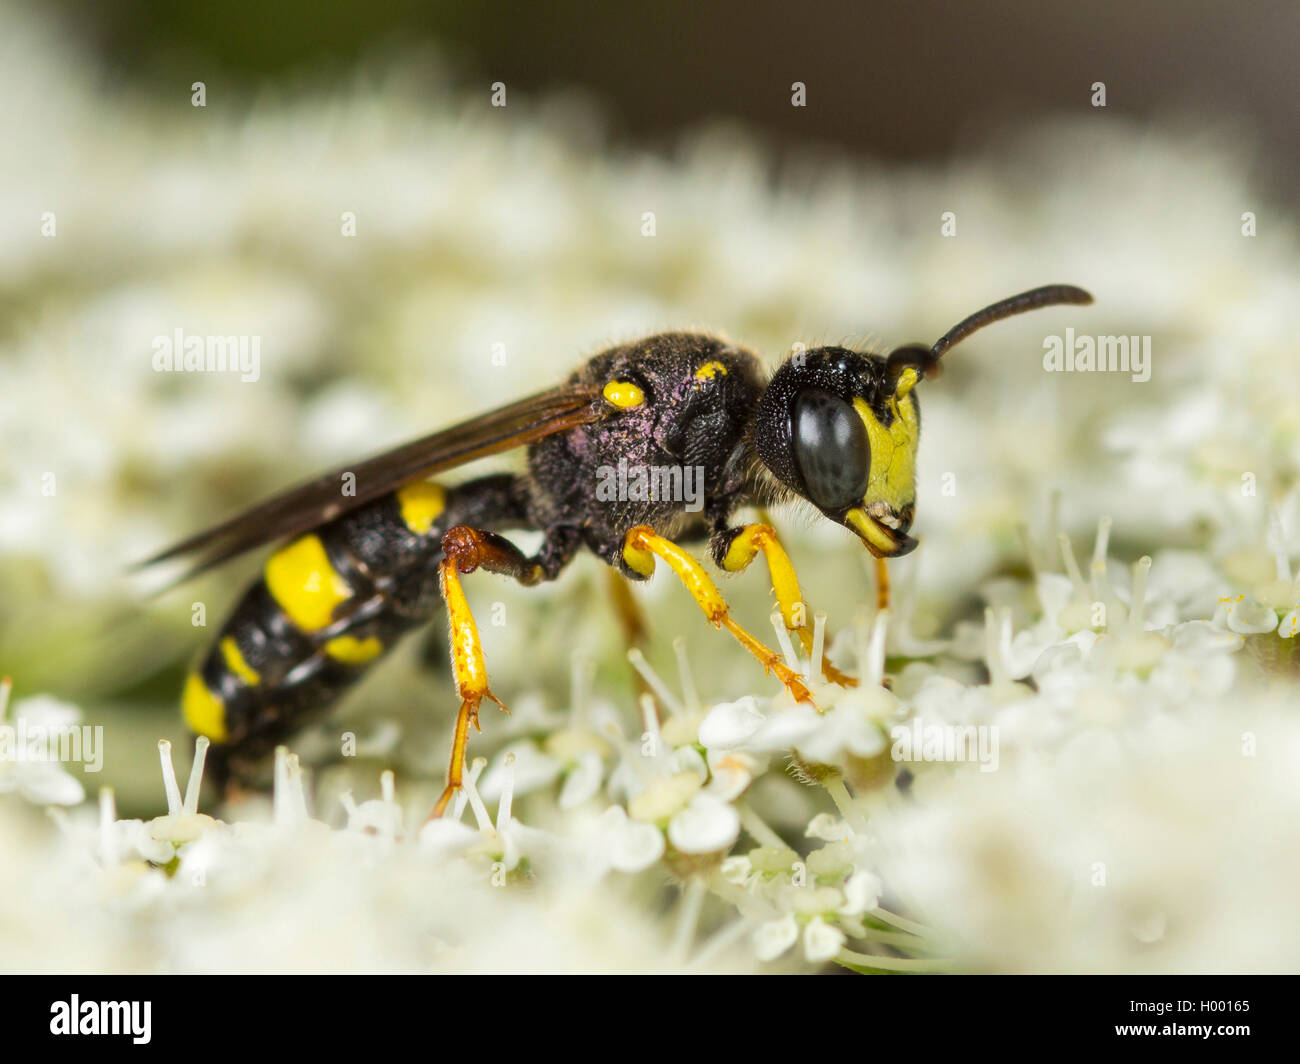 Ornate Tailed Digger Wasp (Cerceris rybyensis), Female foraging on Wild Carrot (Daucus carota), Germany Stock Photo